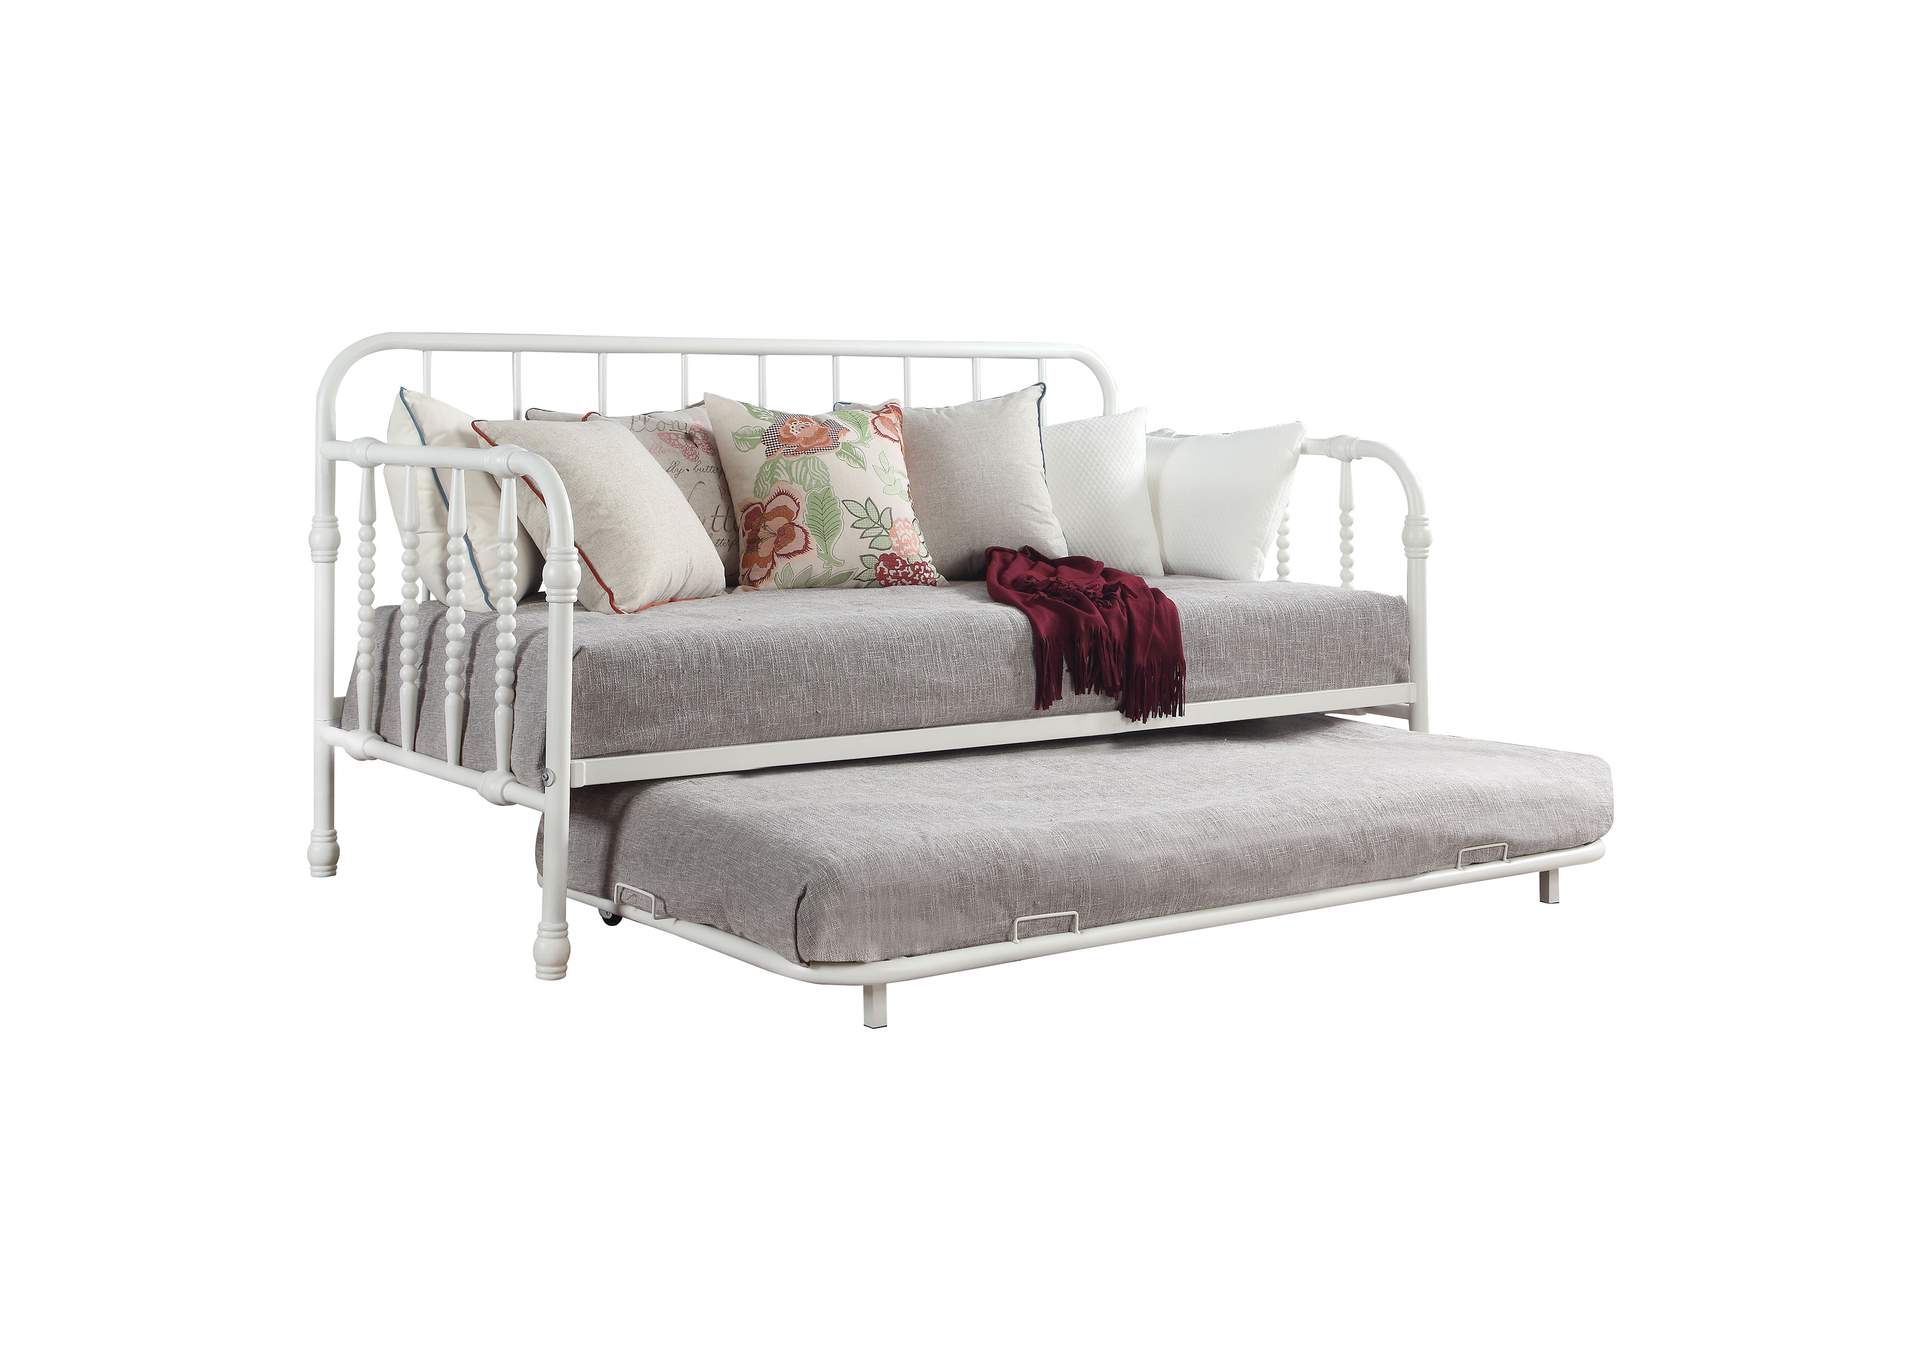 Marina Twin Metal Daybed with Trundle White,Coaster Furniture